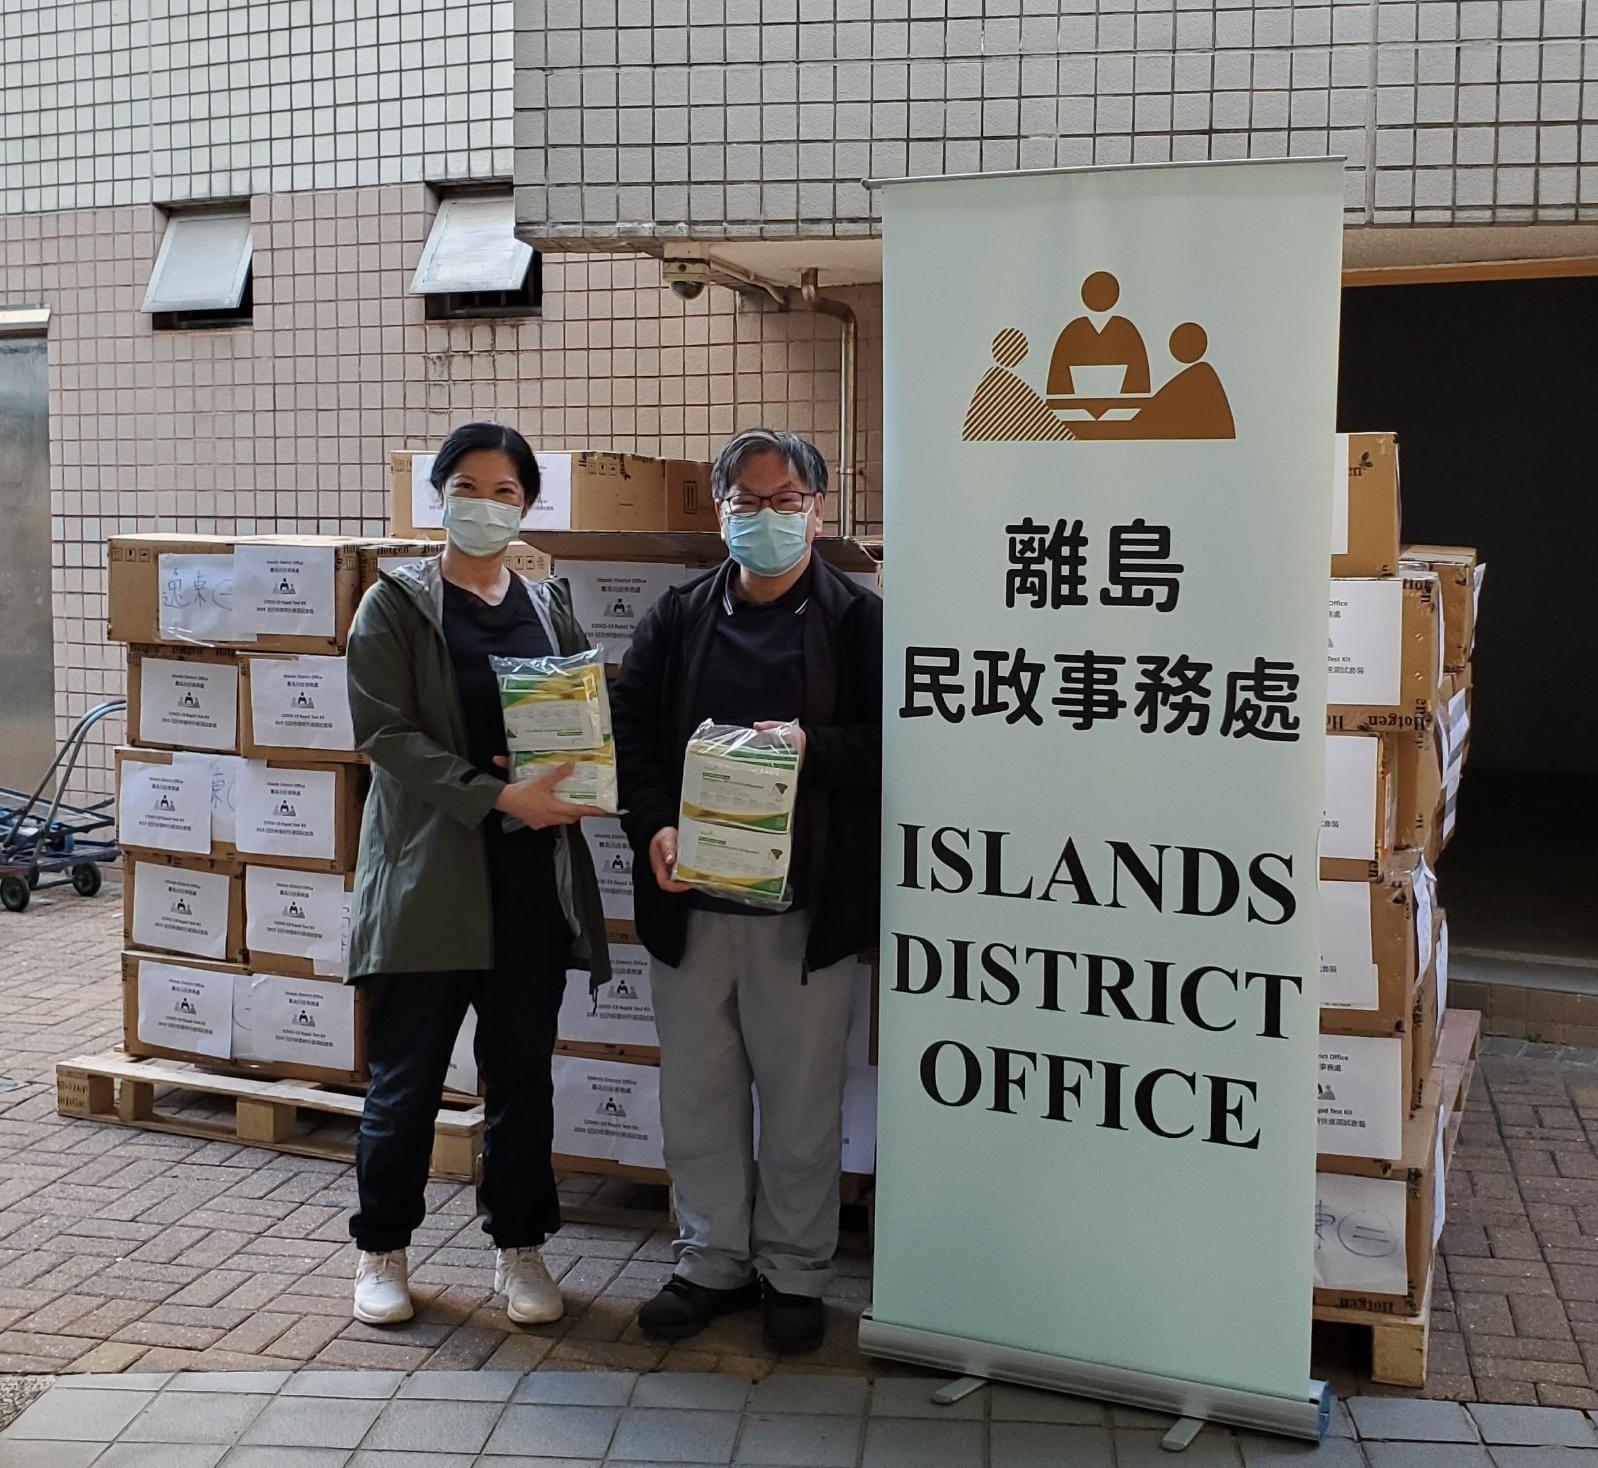 The Islands District Office today (March 9) distributed COVID-19 rapid test kits to households, cleansing workers and property management staff living and working in Yat Tung (I) Estate and Yat Tung (II) Estate for voluntary testing through the property management company.

